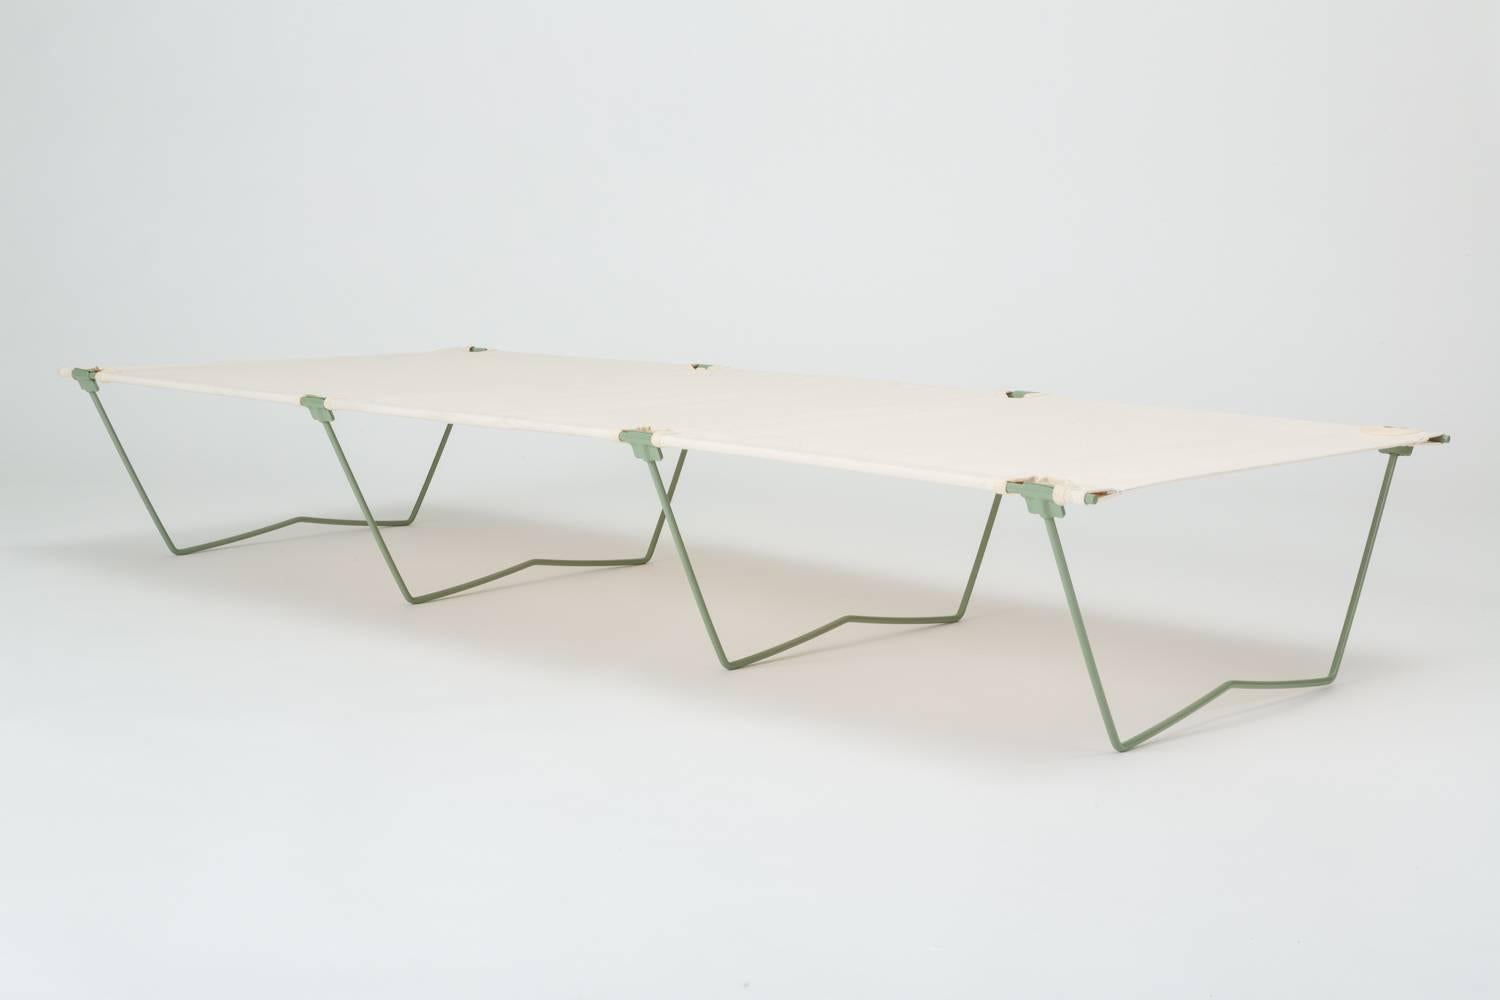 Similar to the collapsible army cot used by the British Army during World War II, this modernist cot has a steel frame powder-coated in a glossy sage green. Four bent legs support the bed from beneath and “clip on” to the frame. A stretched sling in